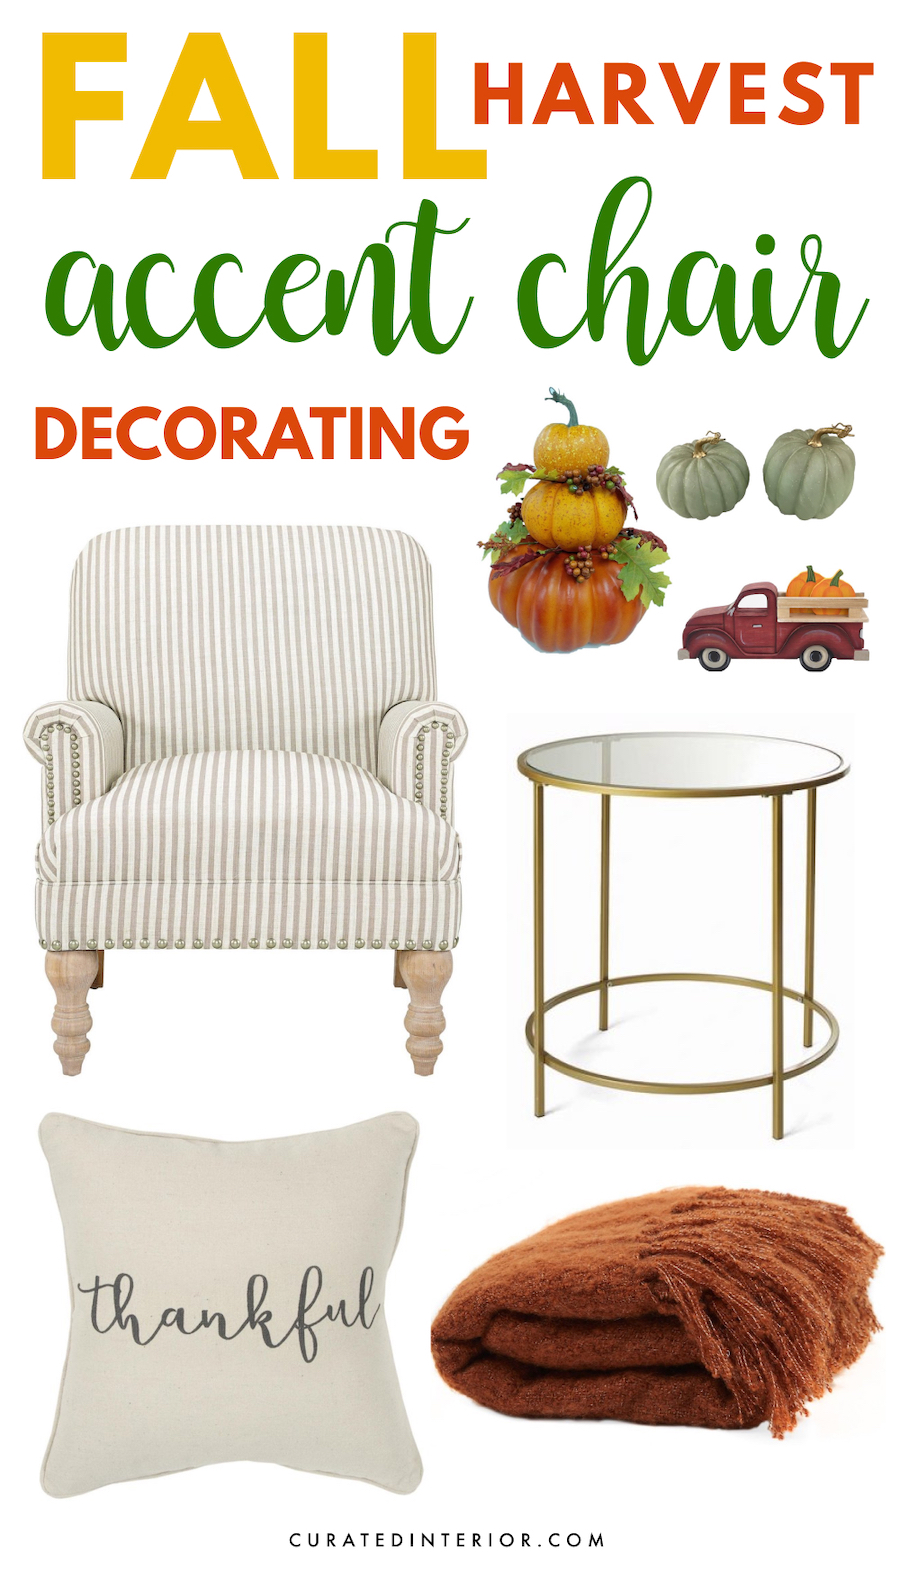 Fall Harvest Accent Chair Decorating